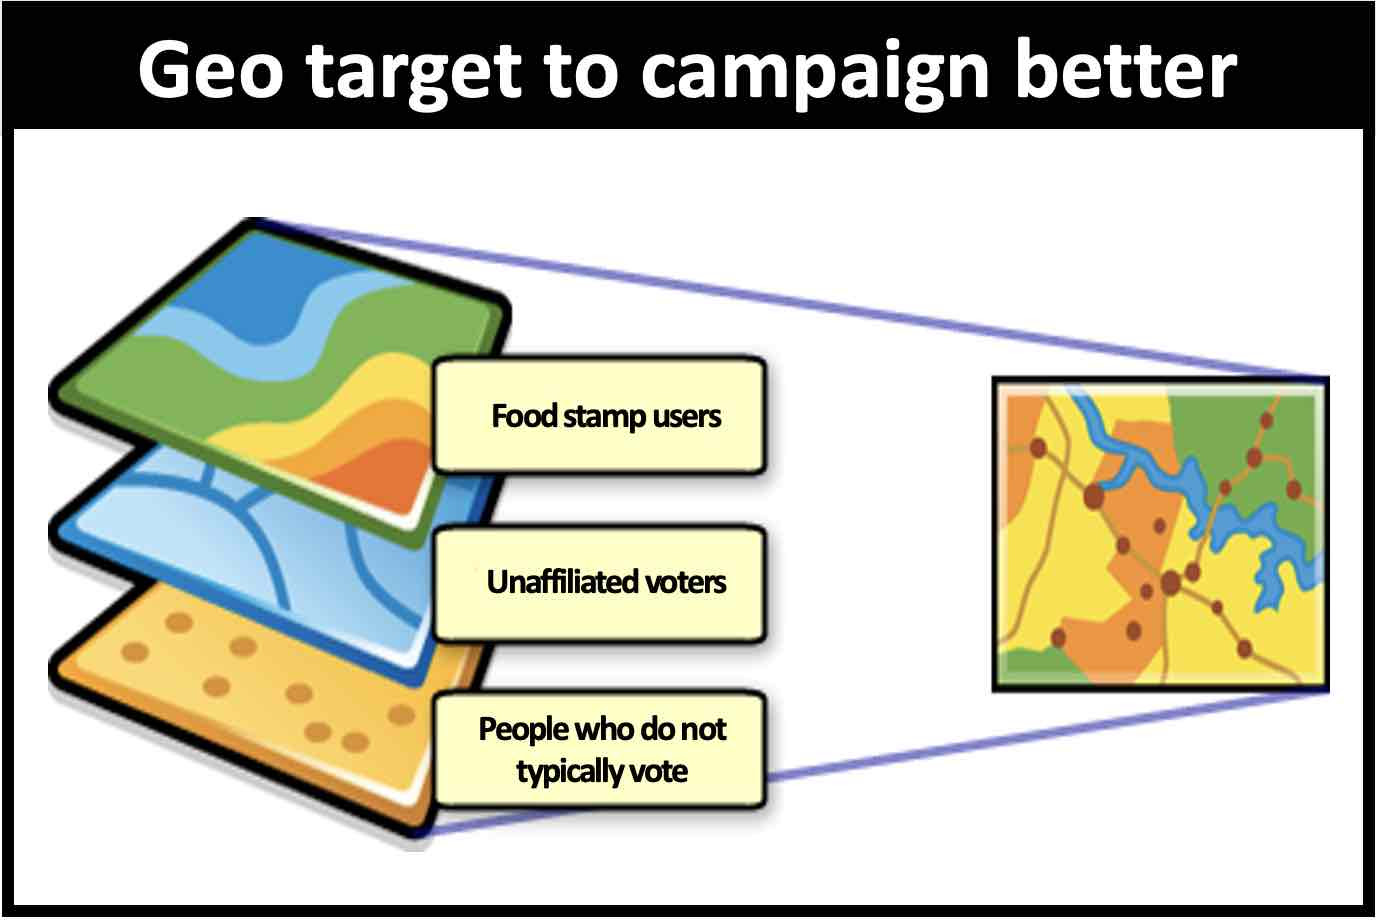 Use geo targeting to campaign better